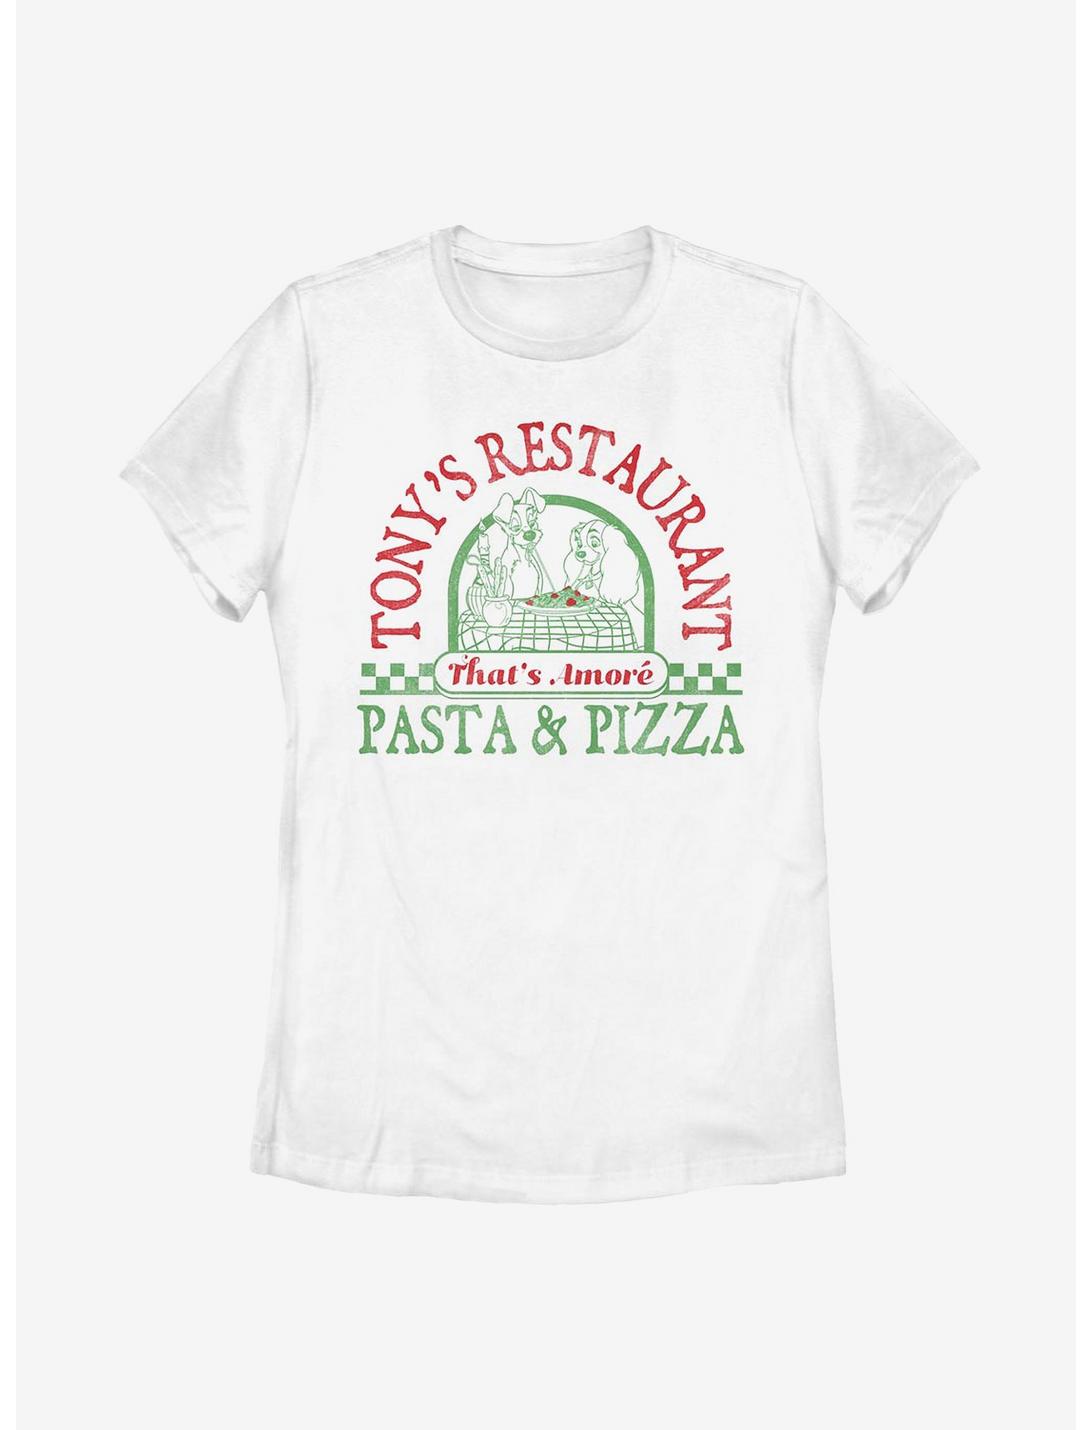 Disney Lady And The Tramp Tony's Pasta & Pizza Womens T-Shirt, WHITE, hi-res